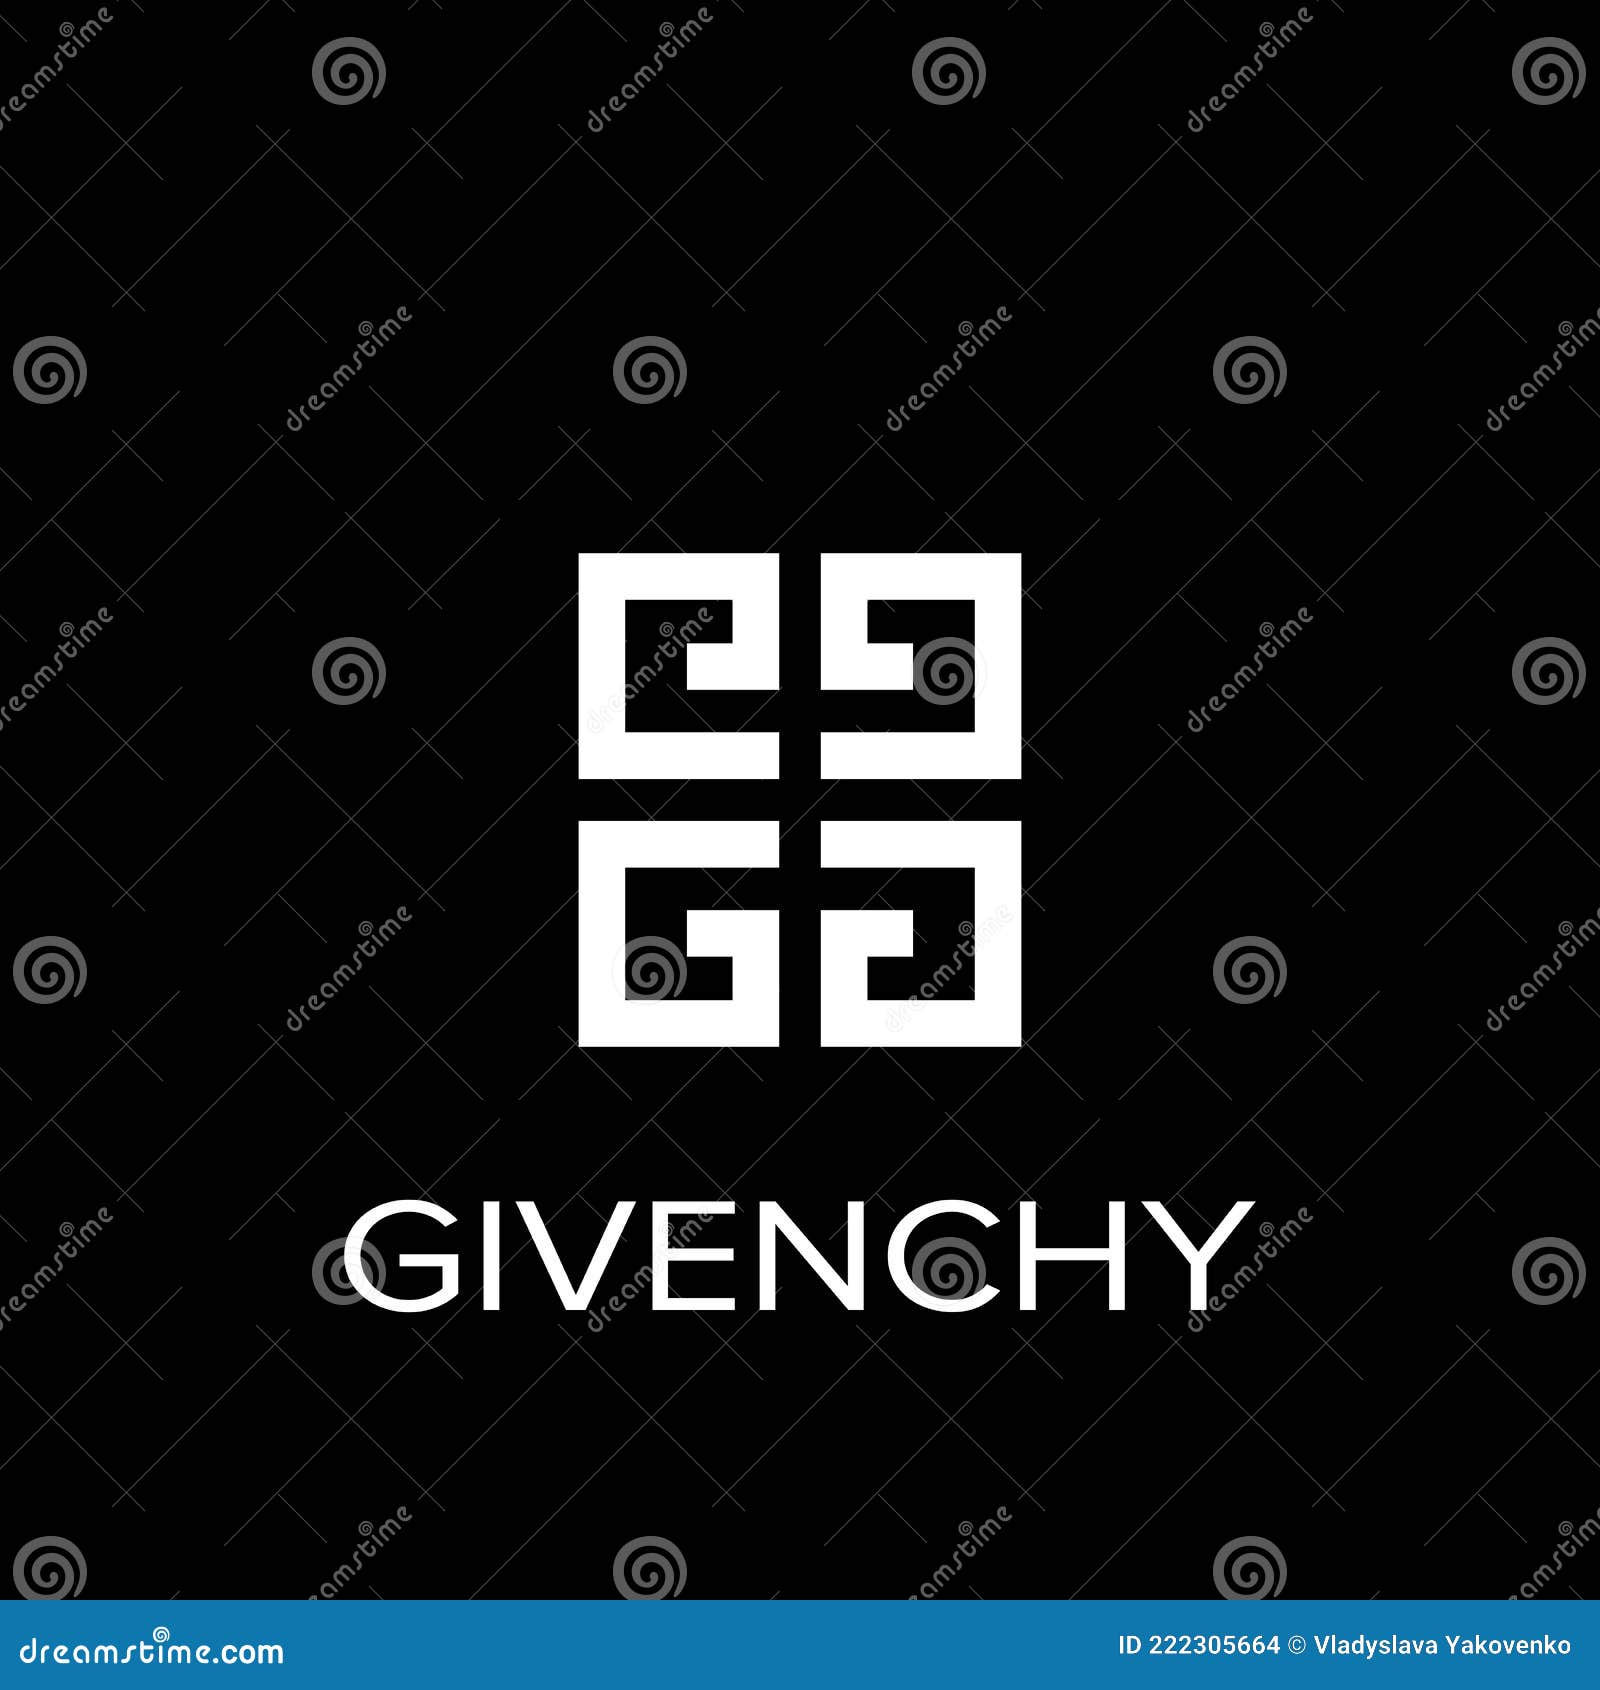 Luxury brands, Givenchy Pants